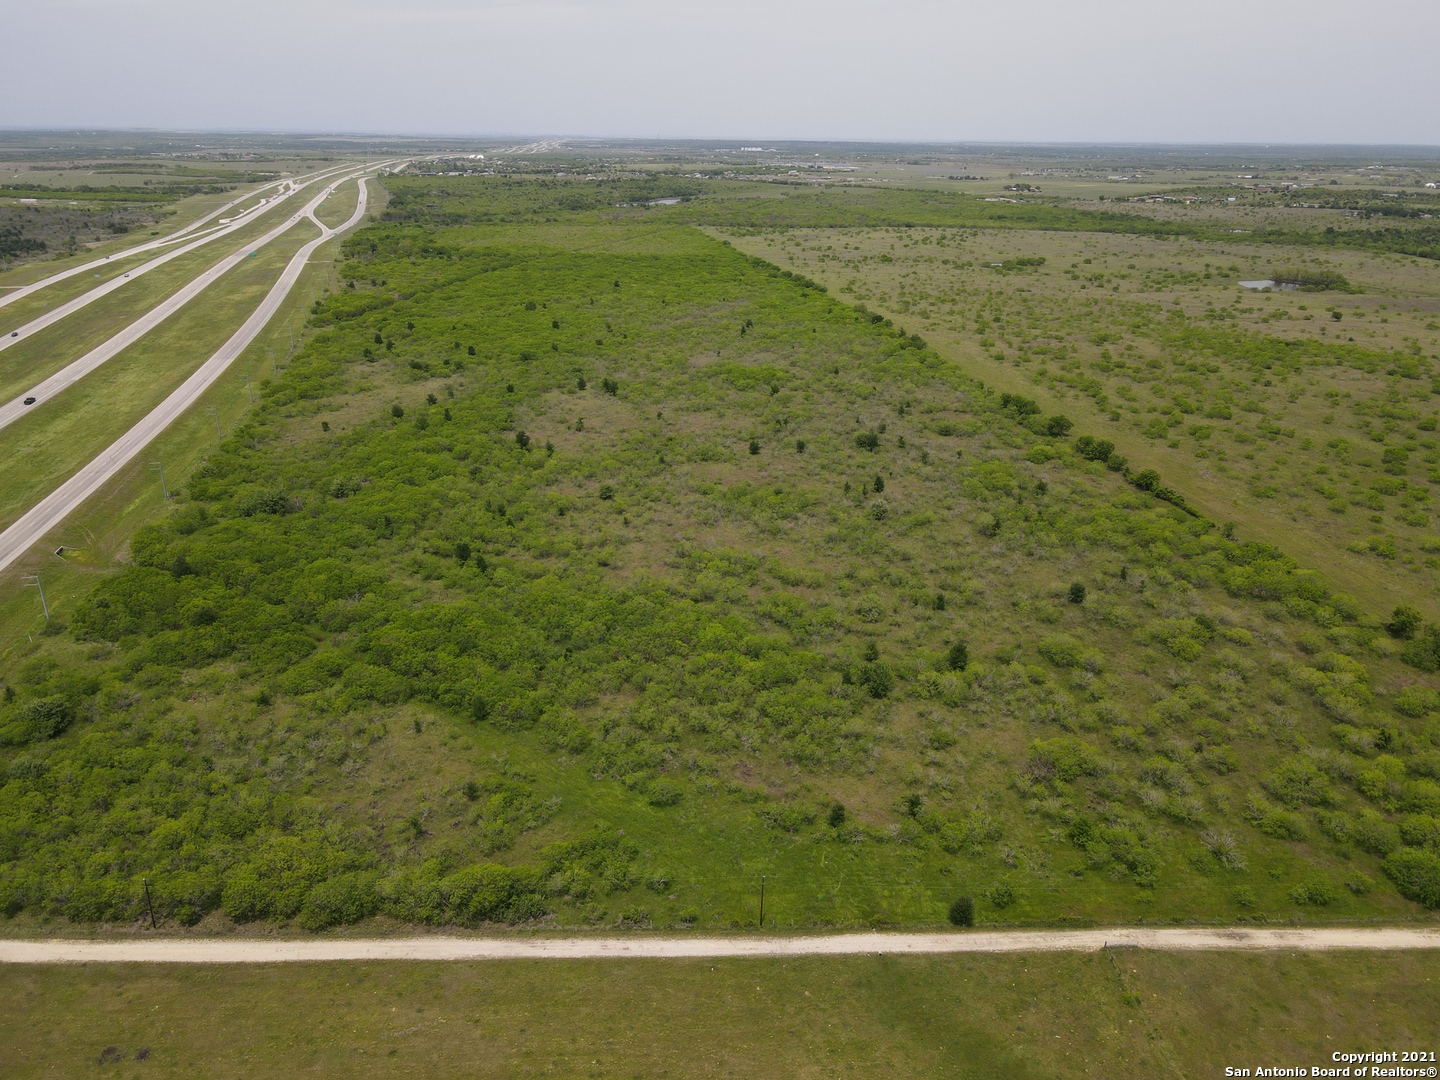 91 +/- Acres of flat, usable land with approximately 3900 feet of frontage on Hwy 183/SH-130. Less than 20 minute drive to Austin Bergstrom International Airport. Perfect for warehousing, shipping, storefront, etc. Call Will Clark directly at 512-557-2984 for inquiry.